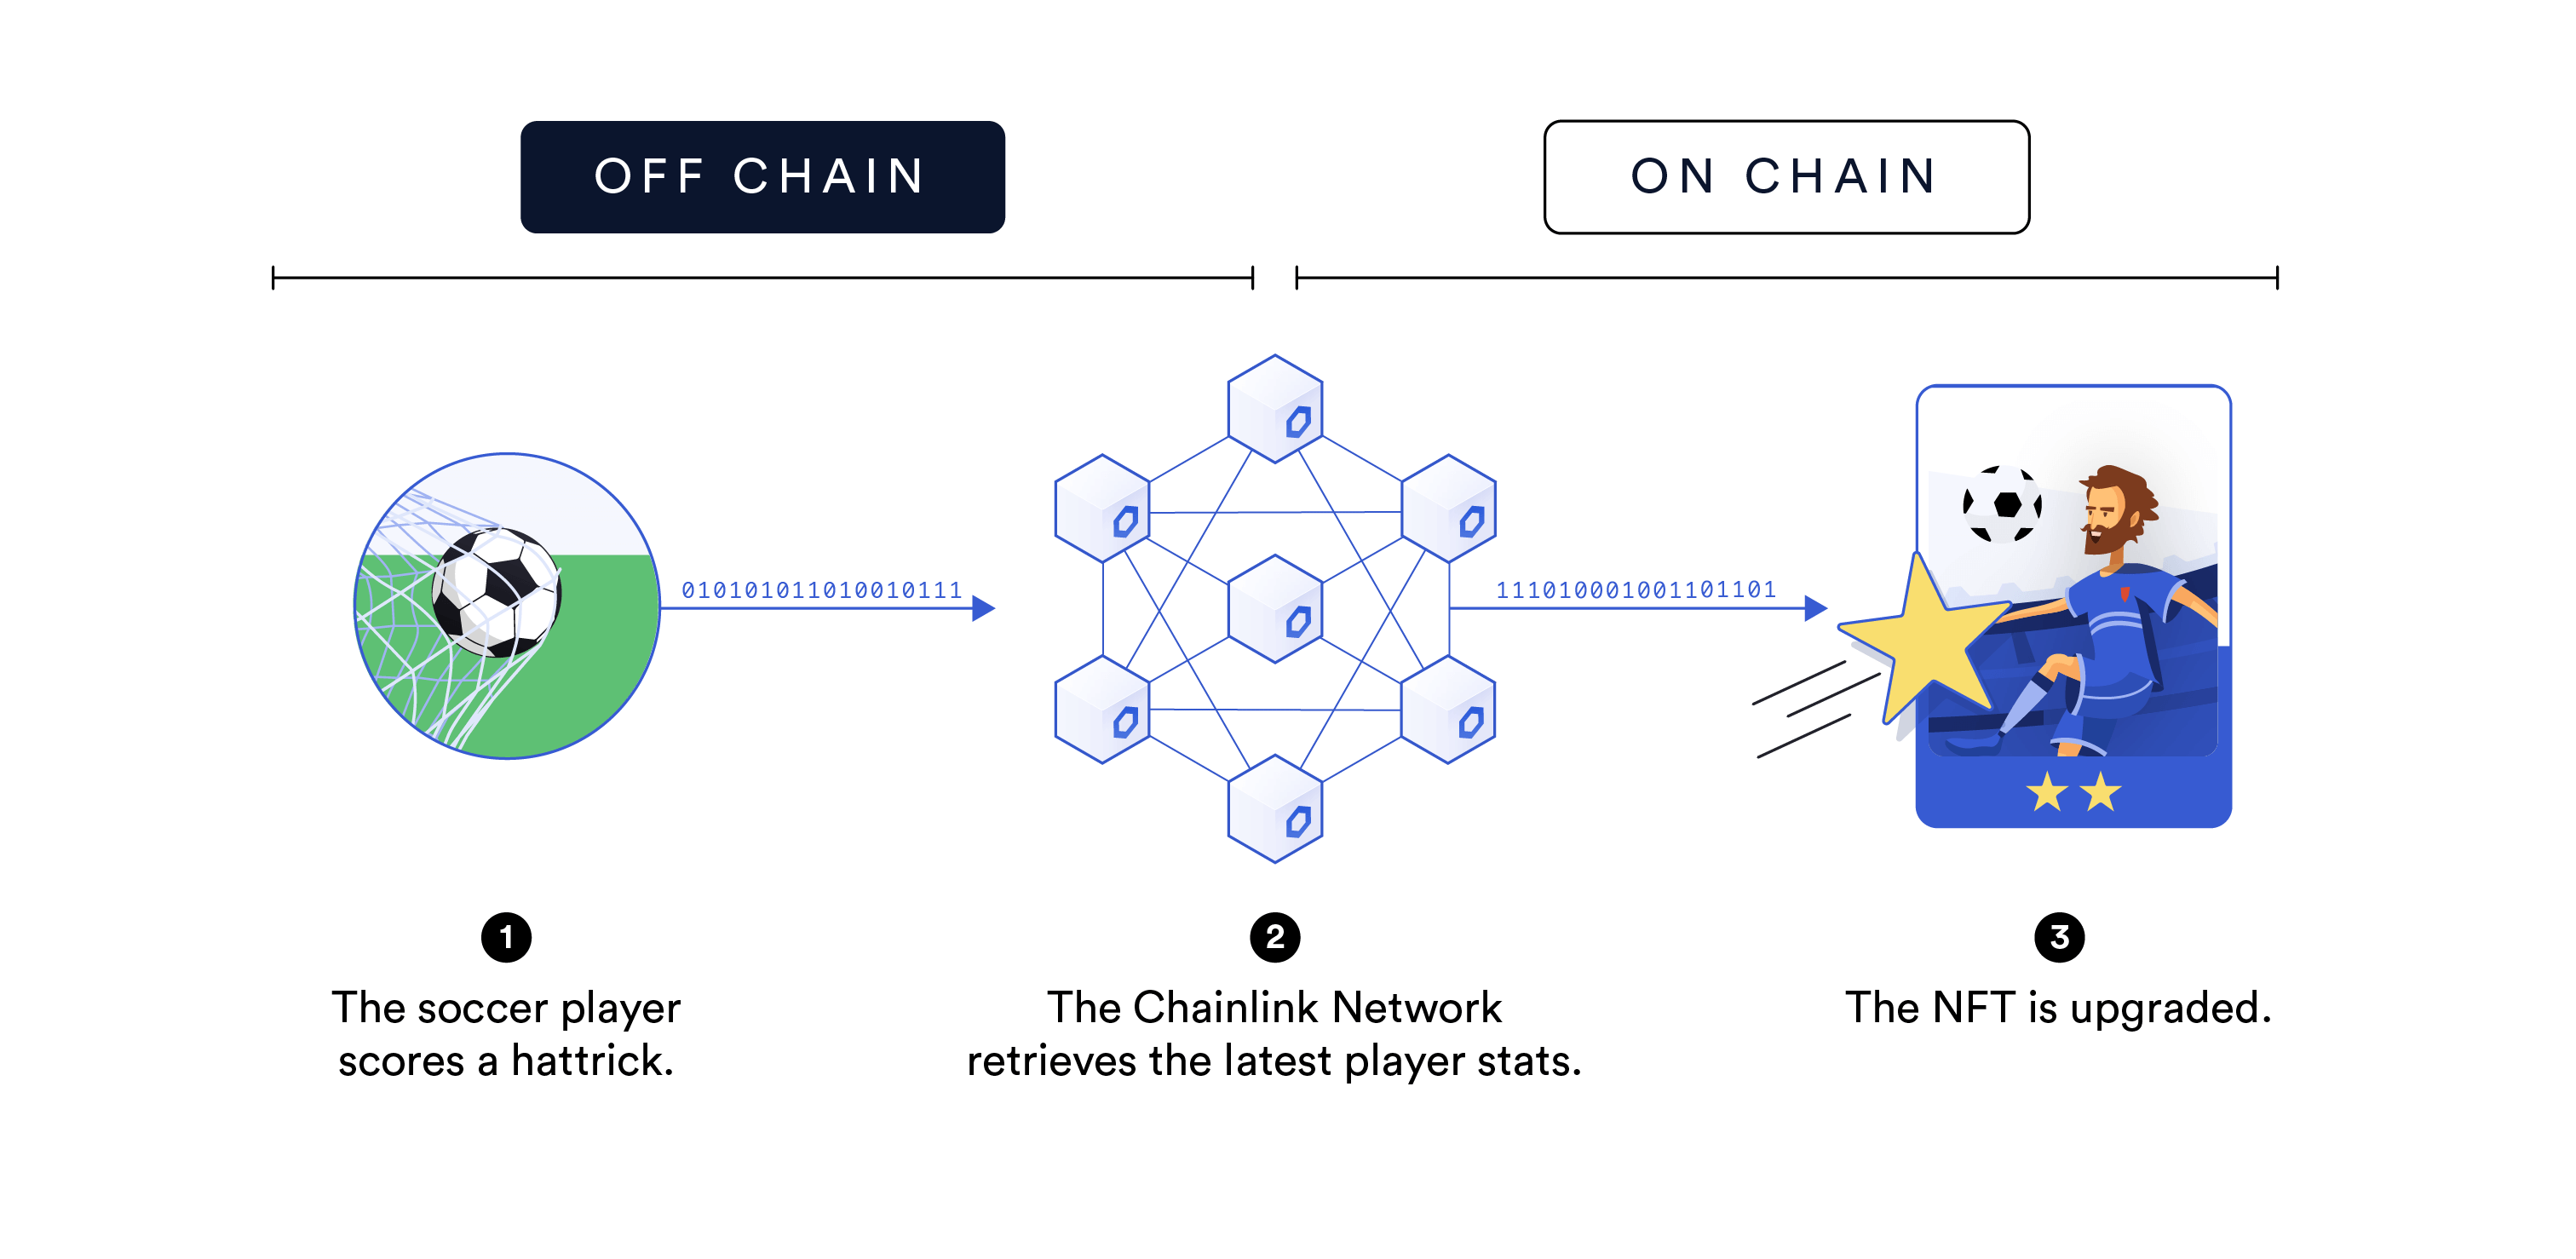 A diagram showing off-chain data going to a Chainlink oracle network to be posted on-chain. 